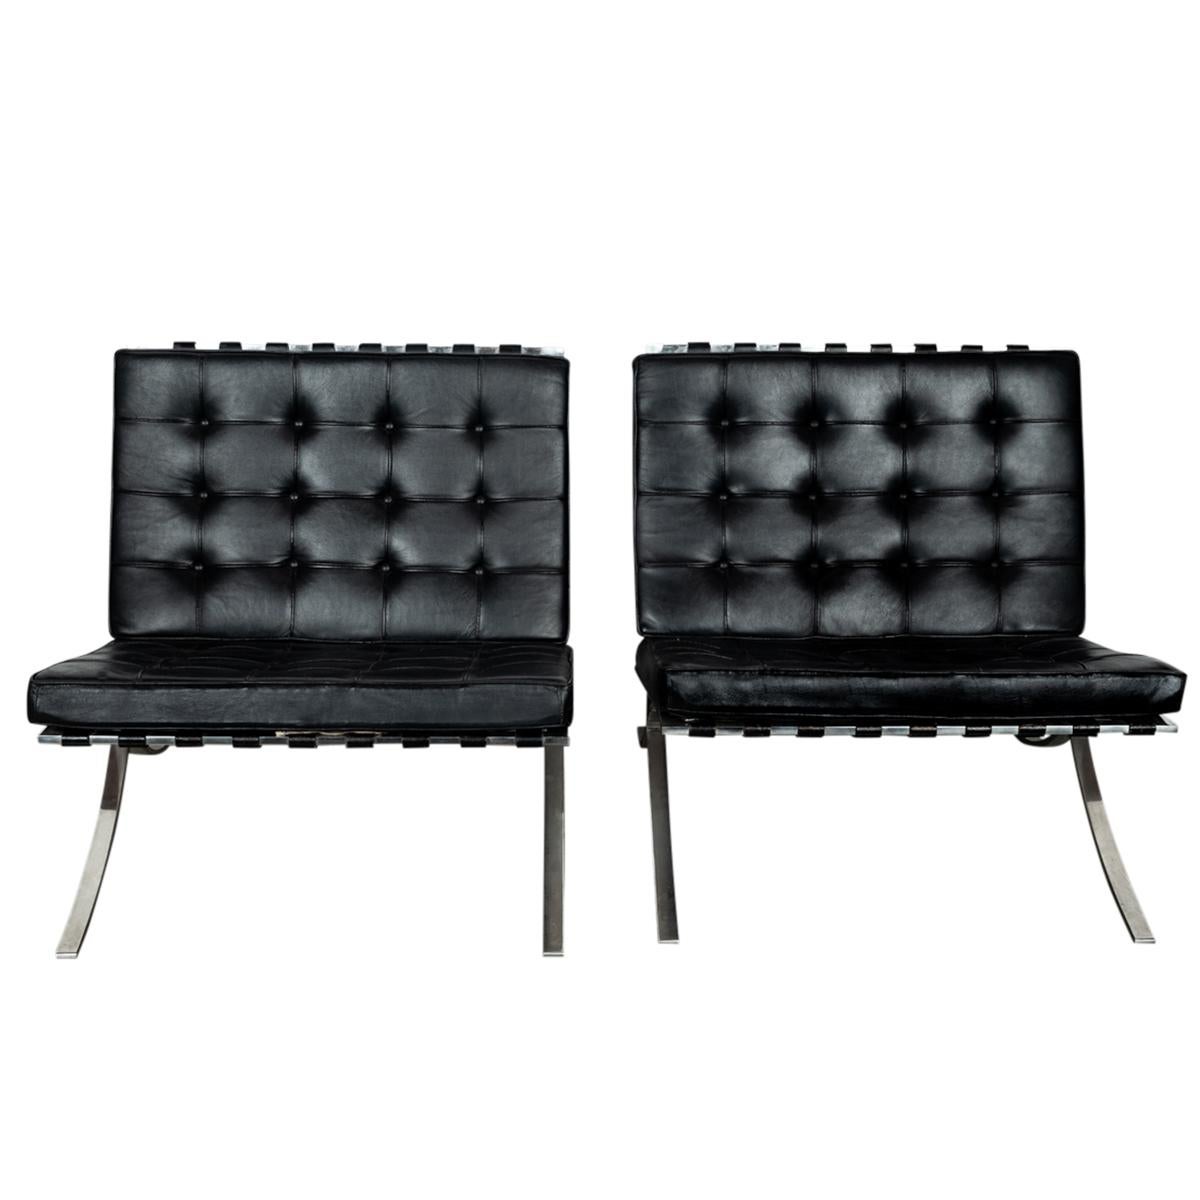 A collectors pair of Early Knoll Associates production Mies van der Rohe Barcelona chairs, 1961.
Knoll had the license to manufacture the Barcelona chair from 1953, this pair were purchased in 1961 and have been with the original owner since they